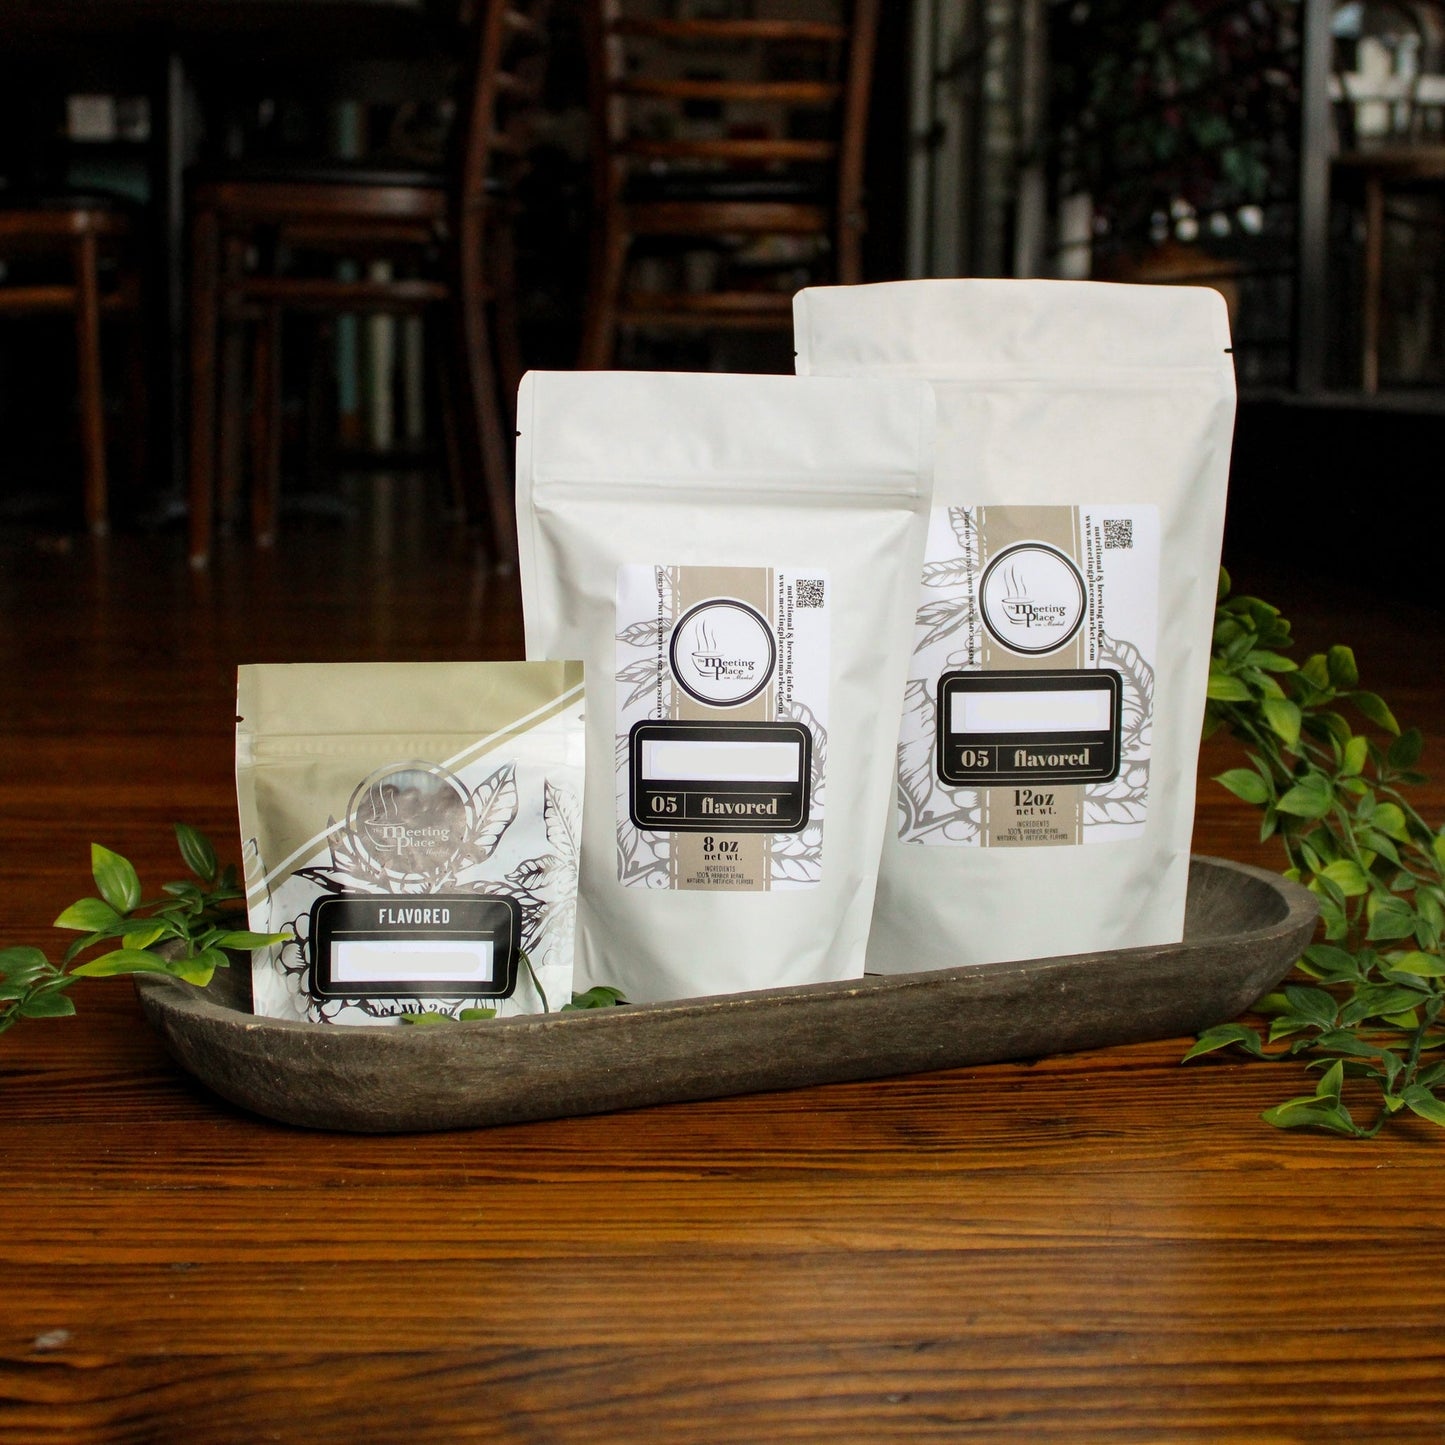 English Toffee Coffee Beans / Ground Coffee Gourmet Coffee - The Meeting Place on Market